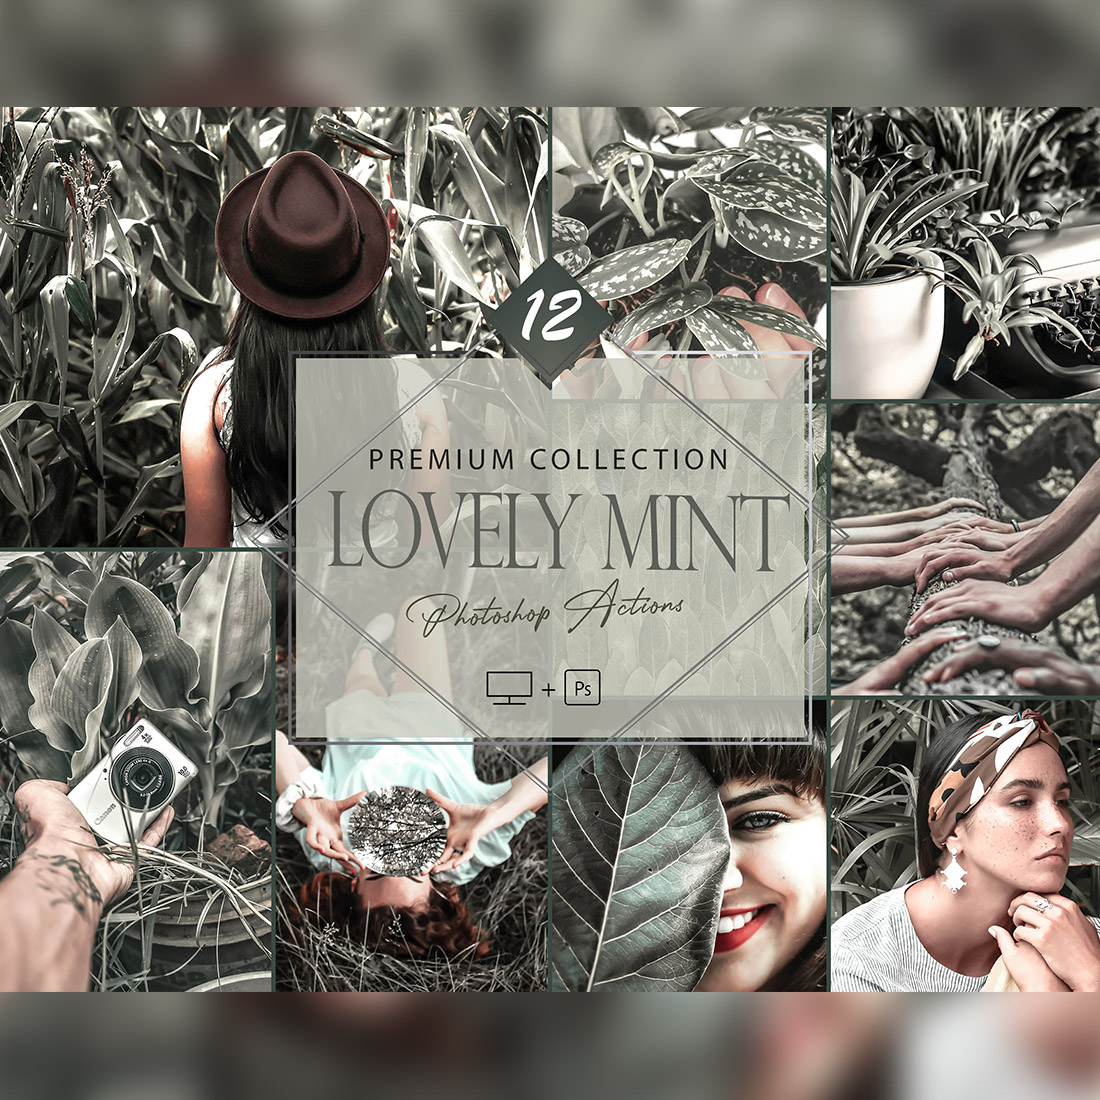 12 Lovely Mint Photoshop Actions, Spring ACR Preset, Green Ps Filter, Portrait And Lifestyle Theme For Instagram, Blogger, Summer Outdoor cover image.